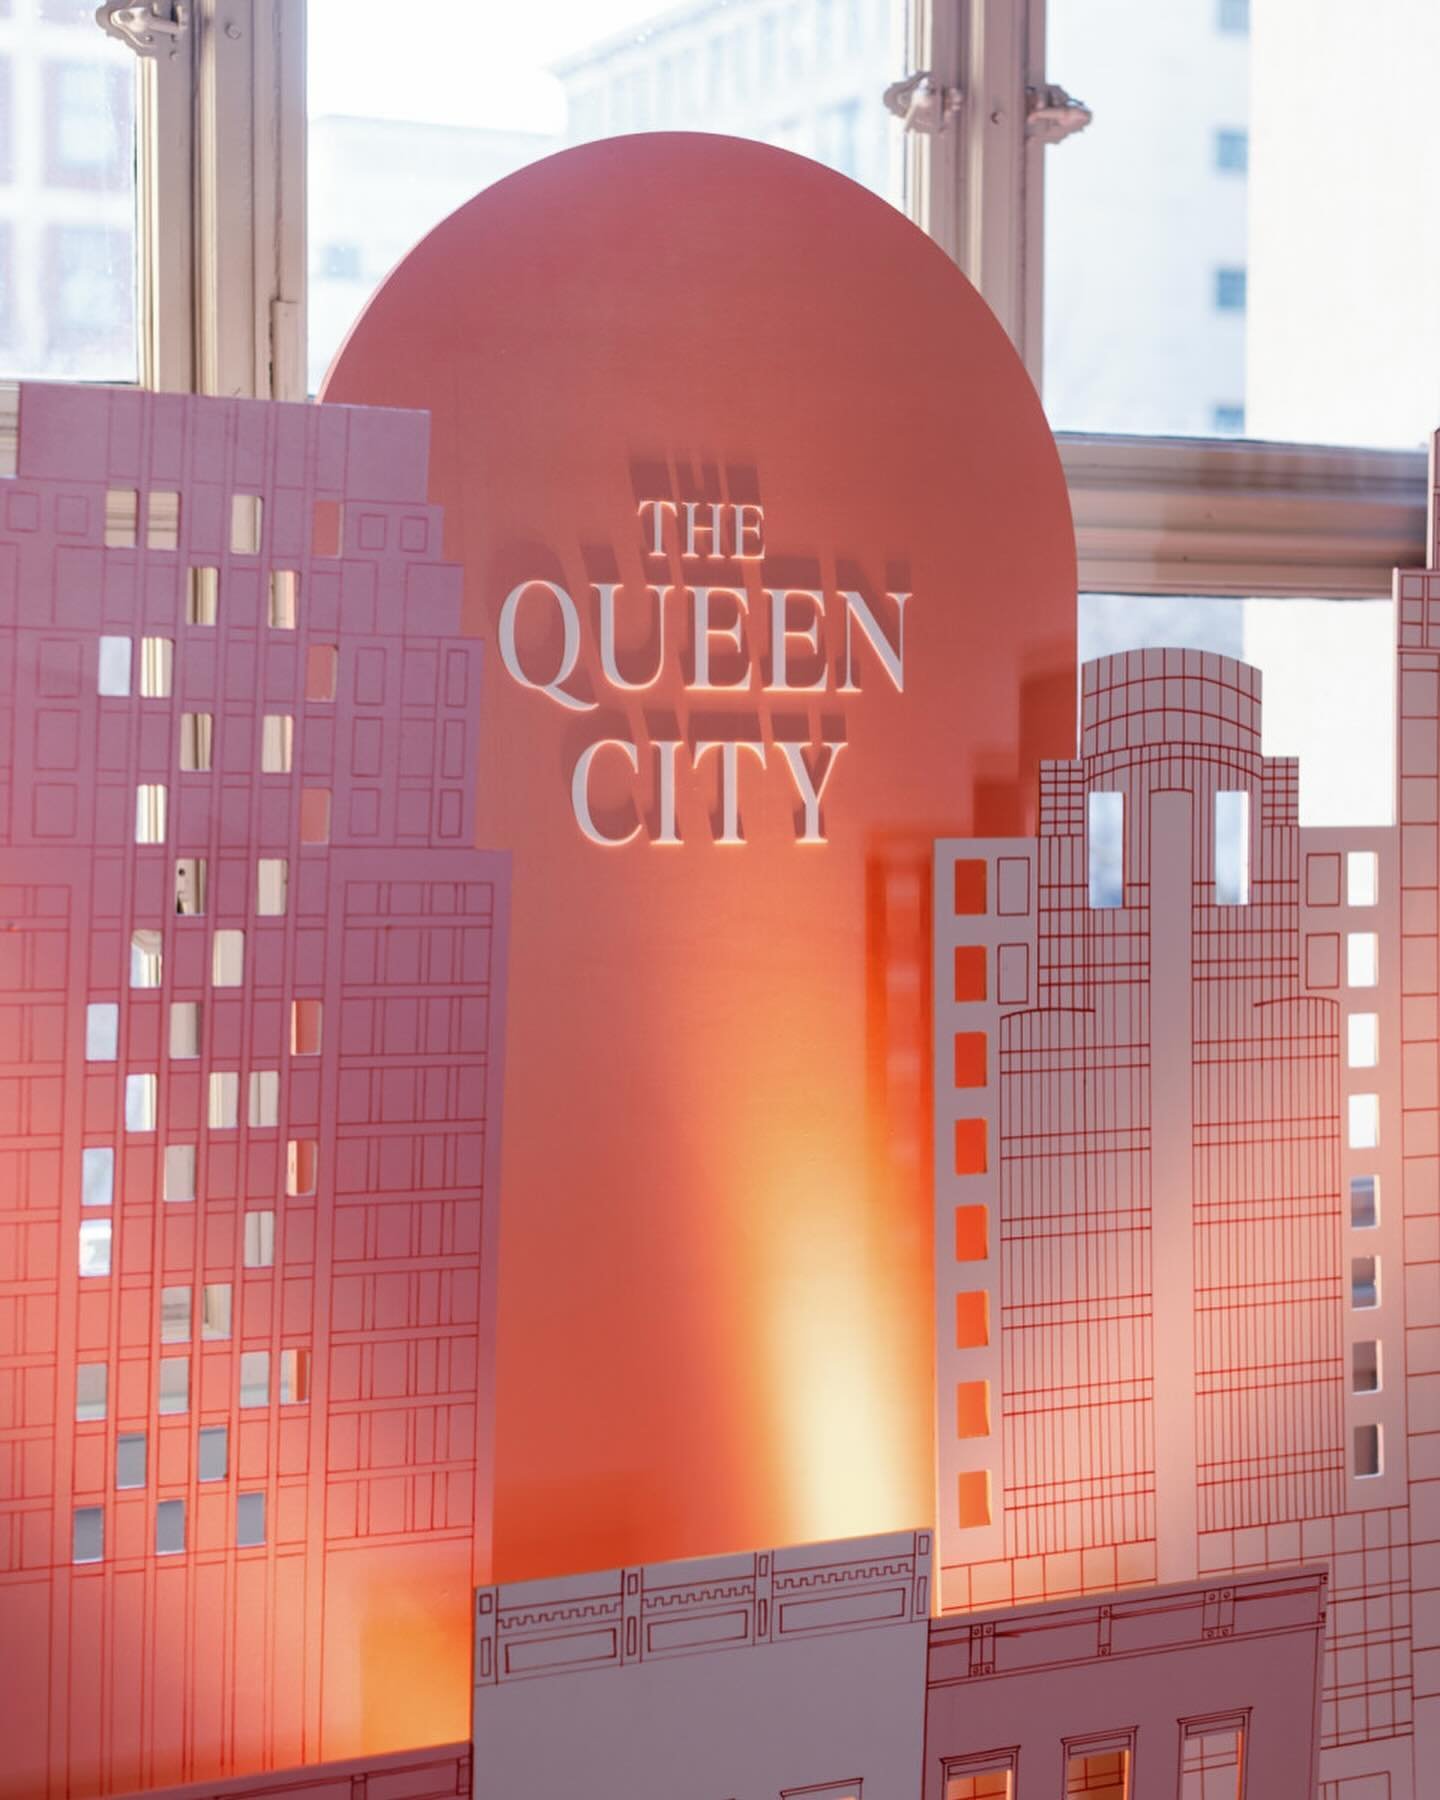 A little touch of the Queen City for our first @wipacincinnati Gala. Swipe to see our custom cnc and hand drawn photo backdrop. 

Creative Teams:

Planning and Design: Leda Anderson Events
IG Handle: @ledaandersonevents

Event on behalf of: WIPA Grea